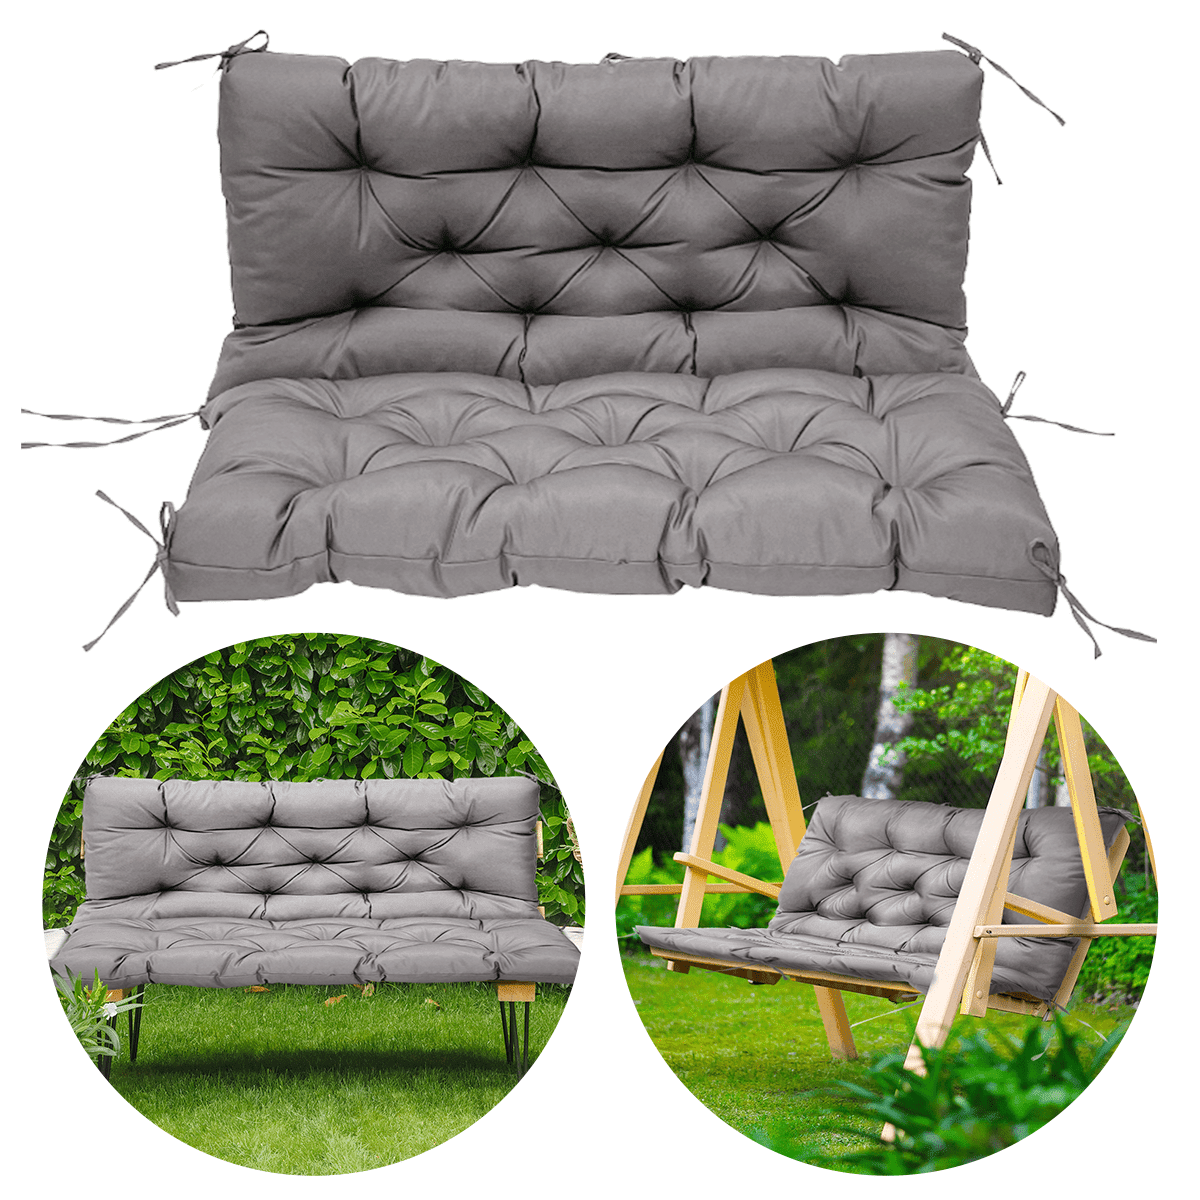  60 Inch Patio Furniture Cushions , Bench Cushion, Outdoor  Indoor Seatcushions, Universal Lounge Chair Mat Wicker Chair Pads For  Outdoor/Indoor For Porch Swing Cushions, Garden Furniture,(Black) : Patio,  Lawn & Garden